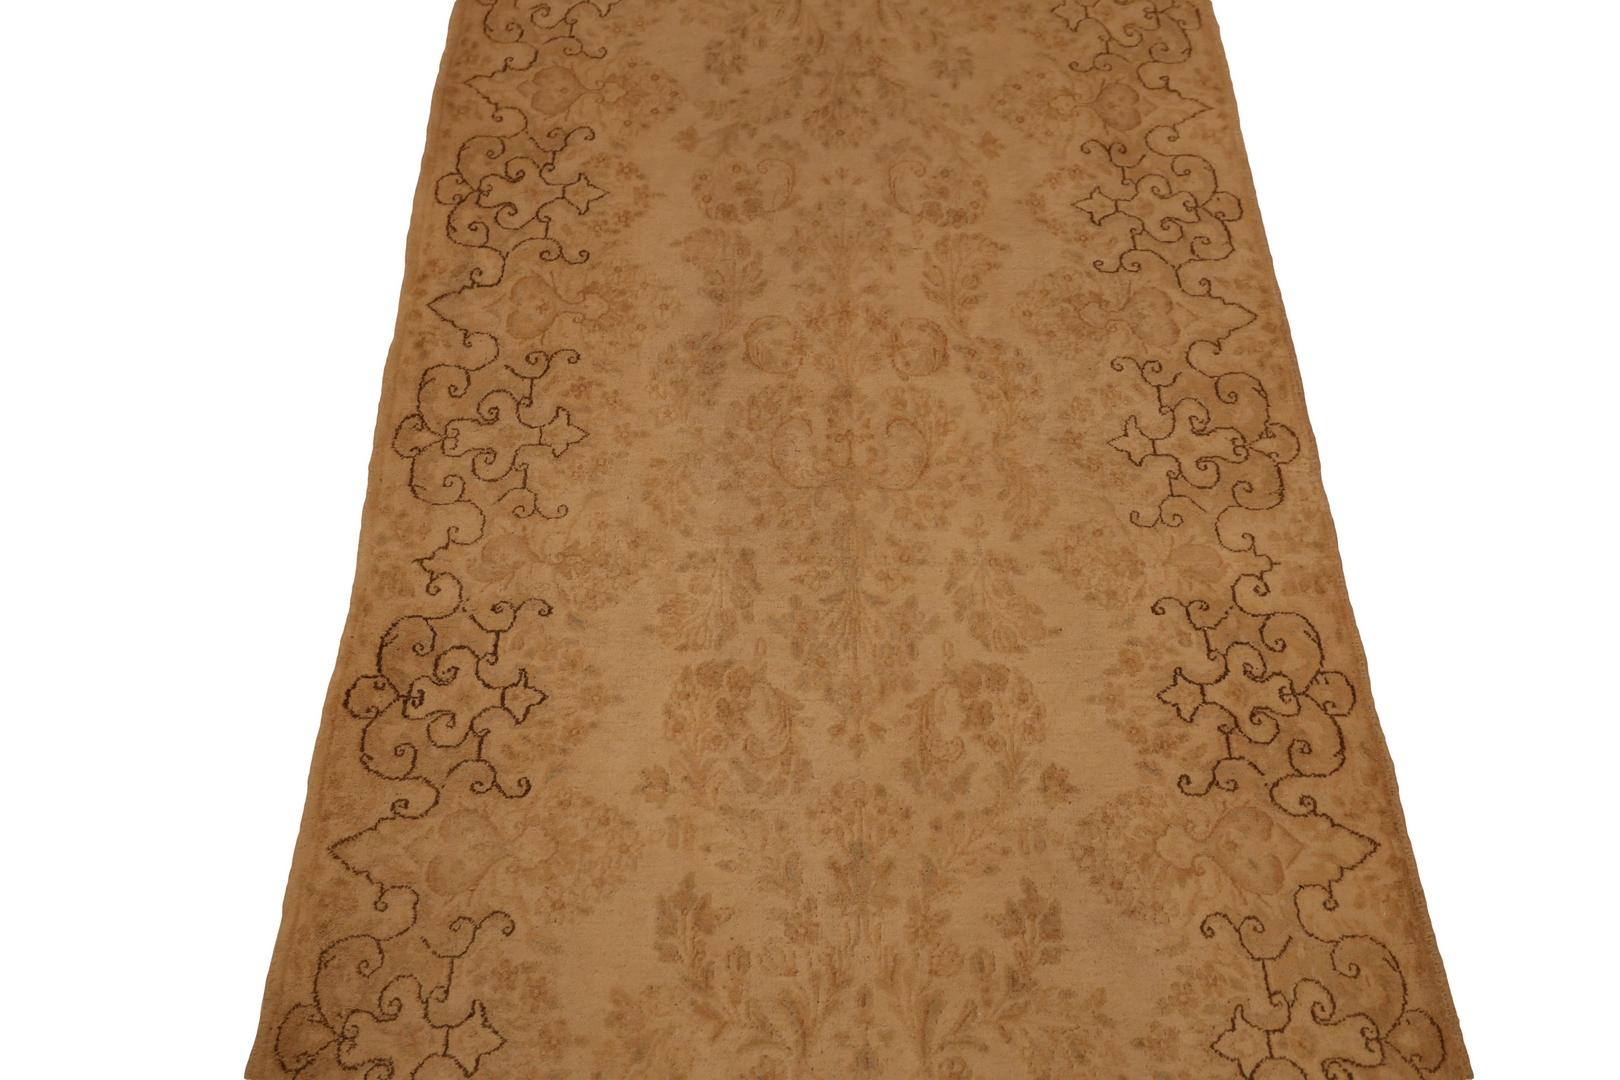 Hand-Knotted Kerman Antique Runner, Antique-Washed - 3'5